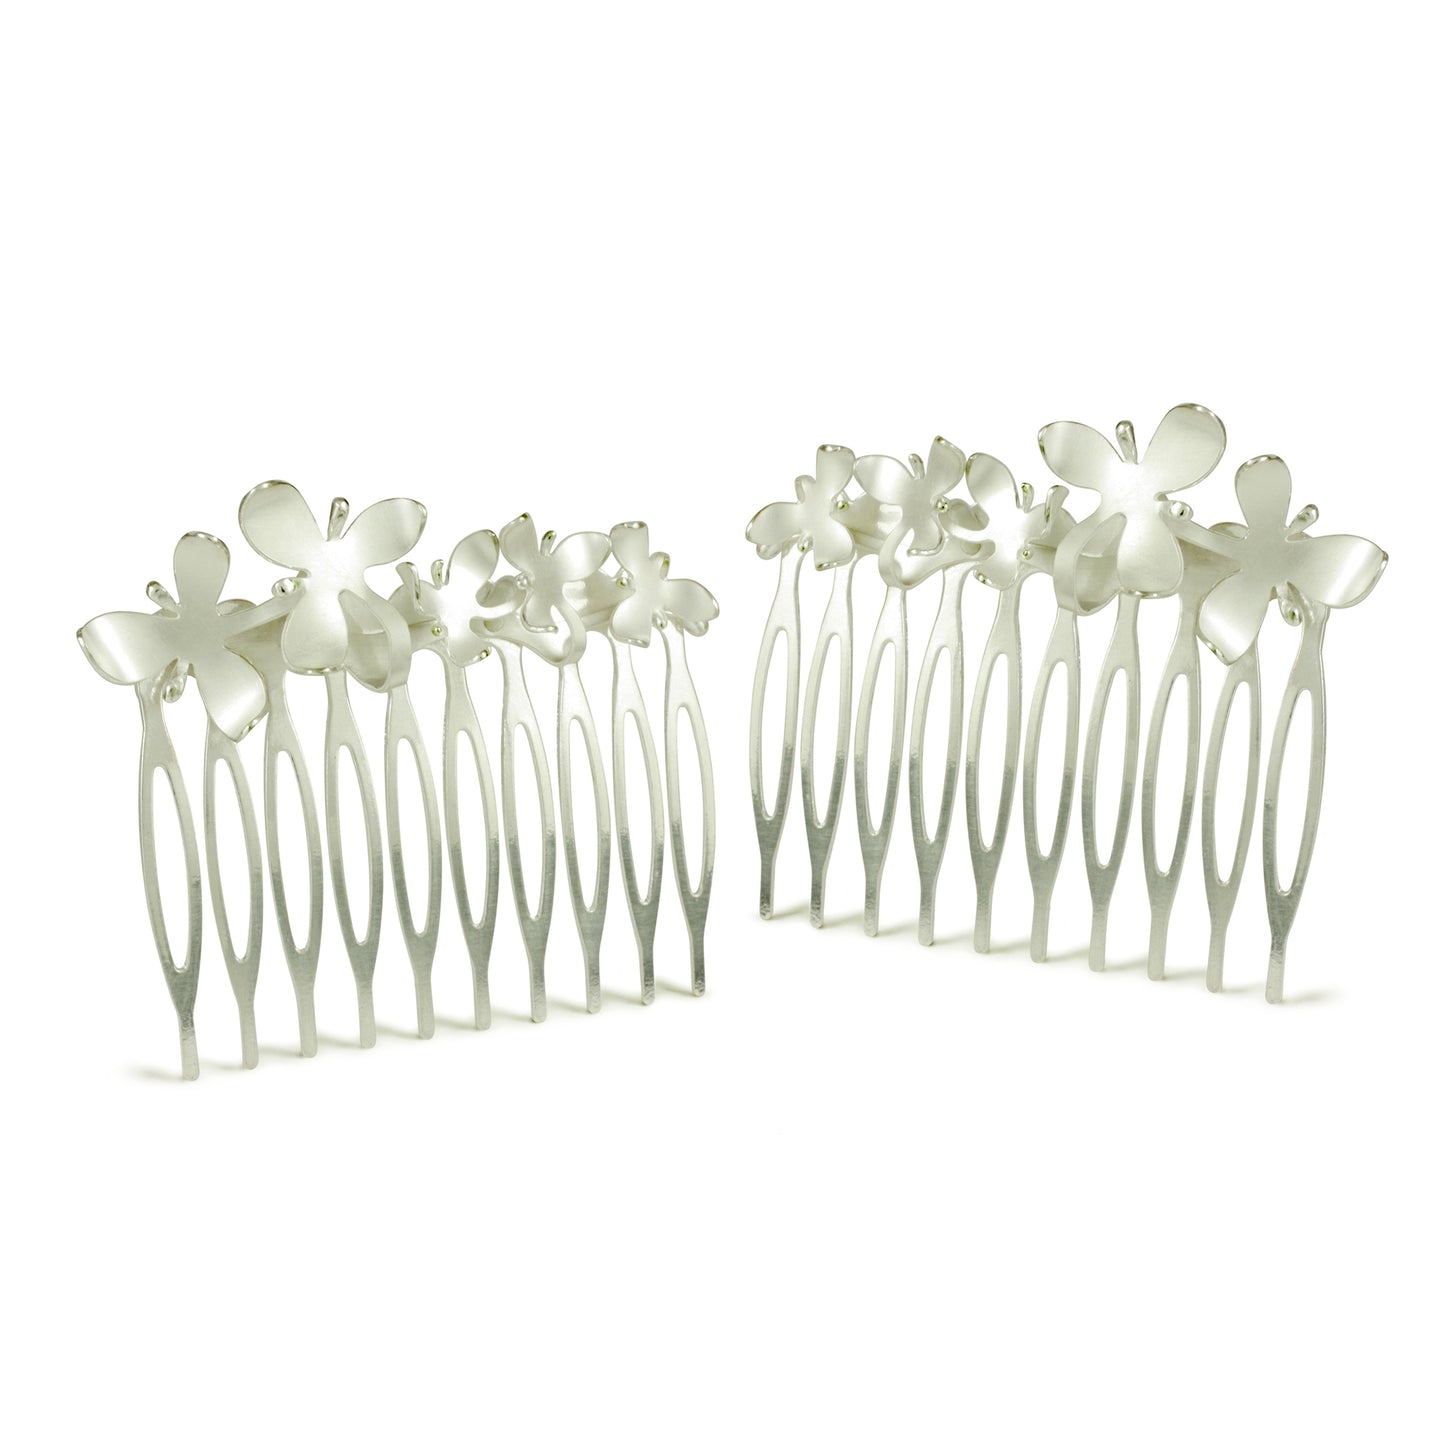 Pair of Silver Orchid Bridal Hair combs, can become a set of jewellery